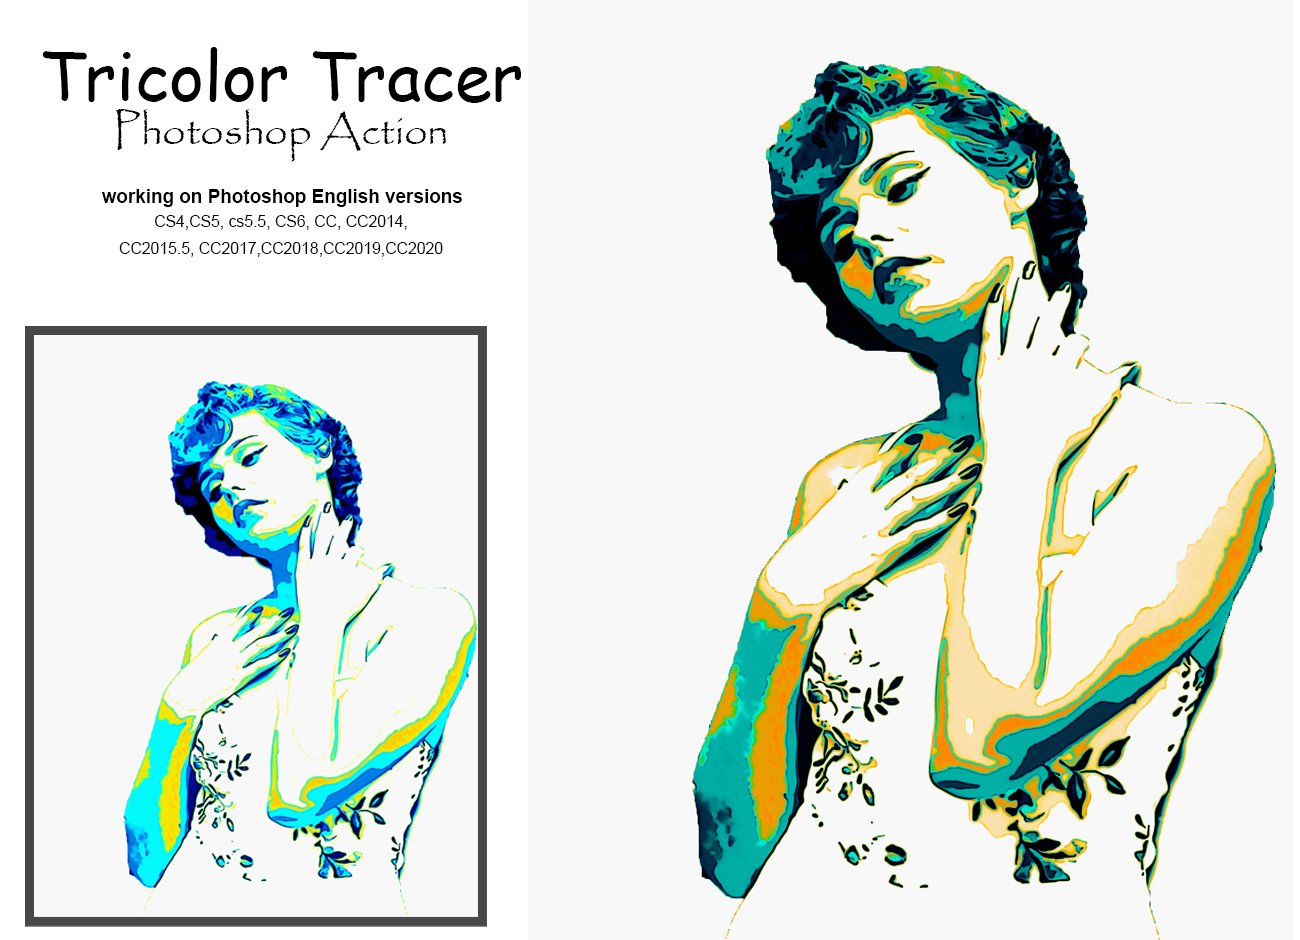 Tricolor Tracer Photoshop Actioncover image.